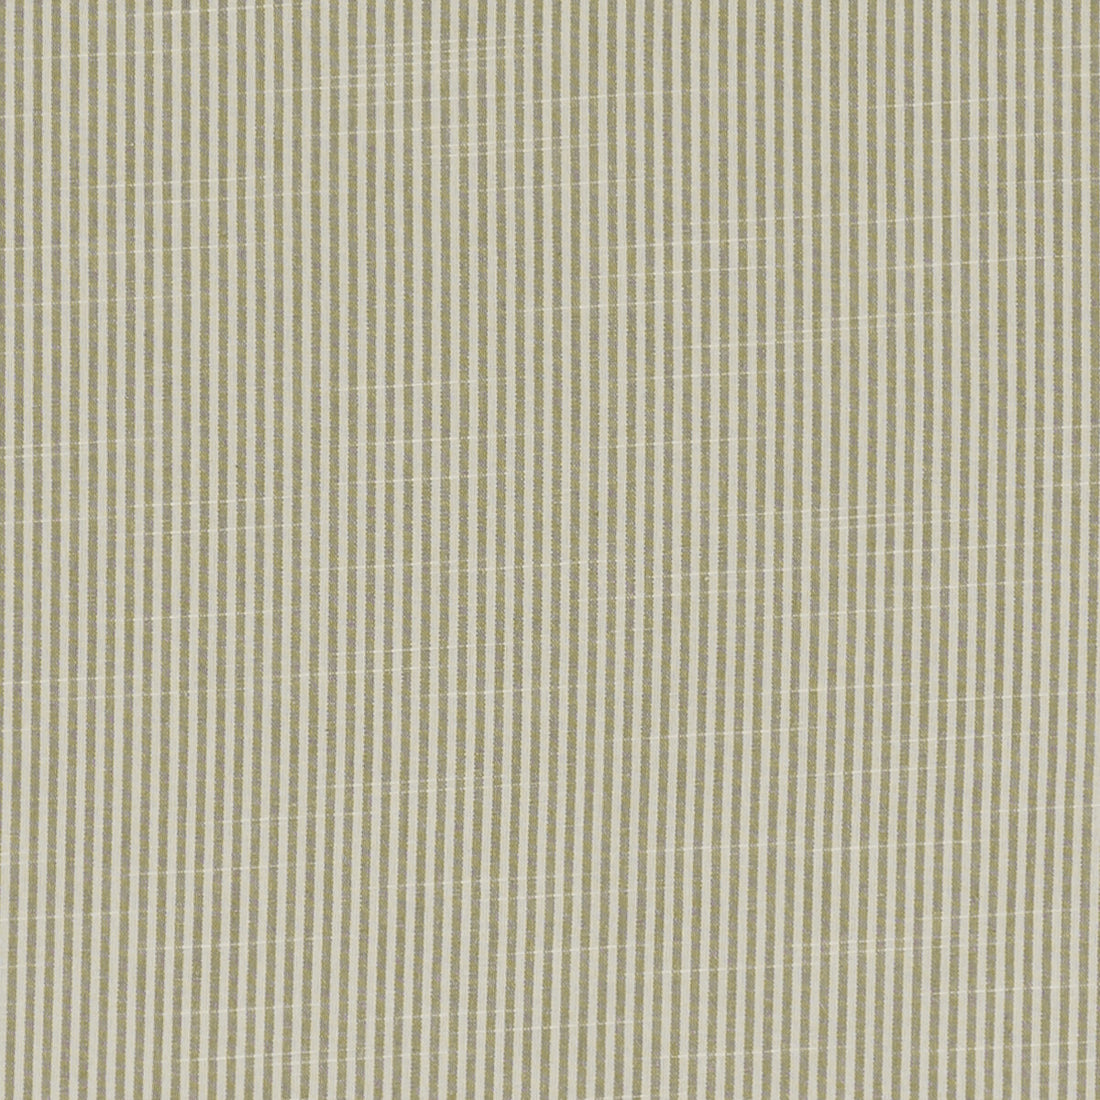 Bempton fabric in natural color - pattern F1307/07.CAC.0 - by Clarke And Clarke in the Bempton By Studio G For C&amp;C collection